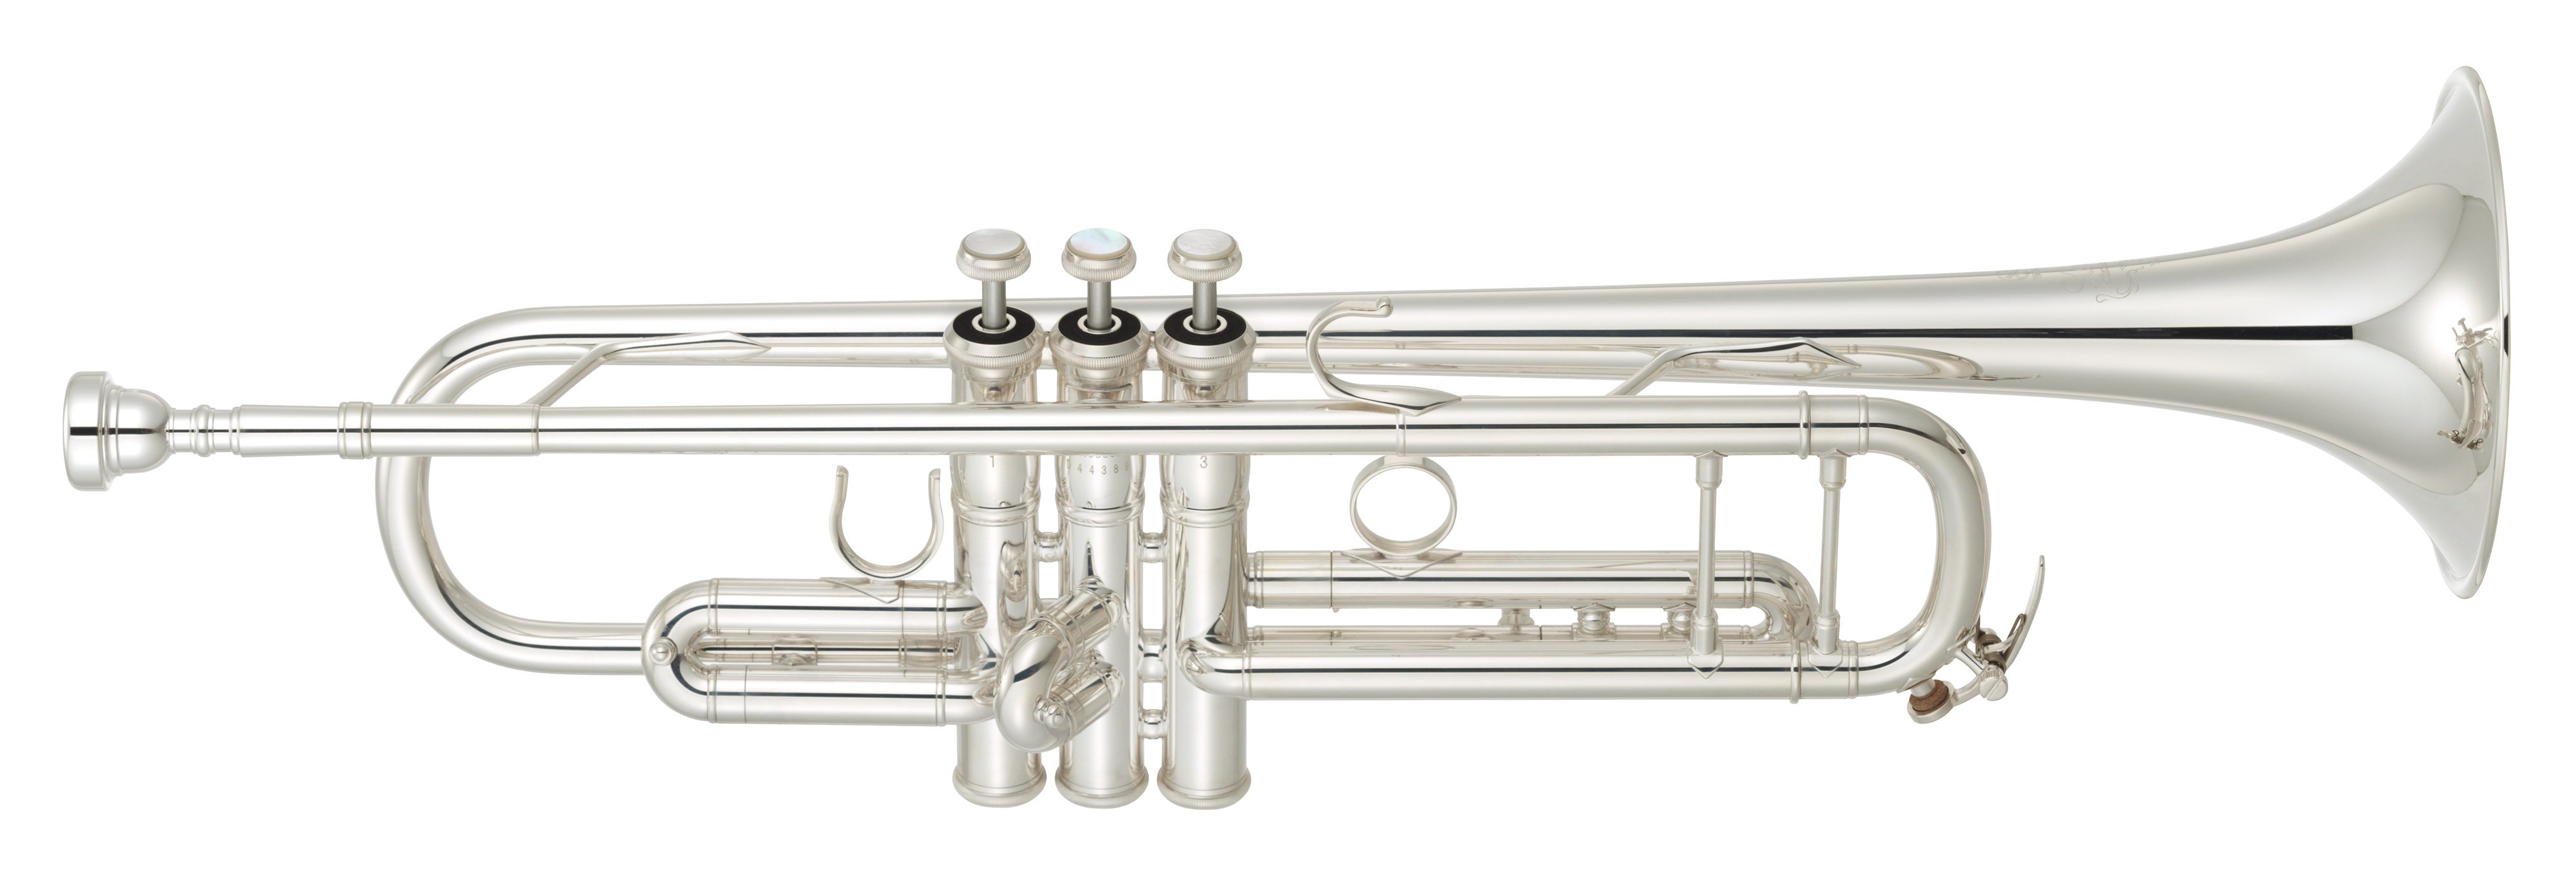 YTR-9335NYS - Overview - Bb Trumpets - Trumpets - Brass 